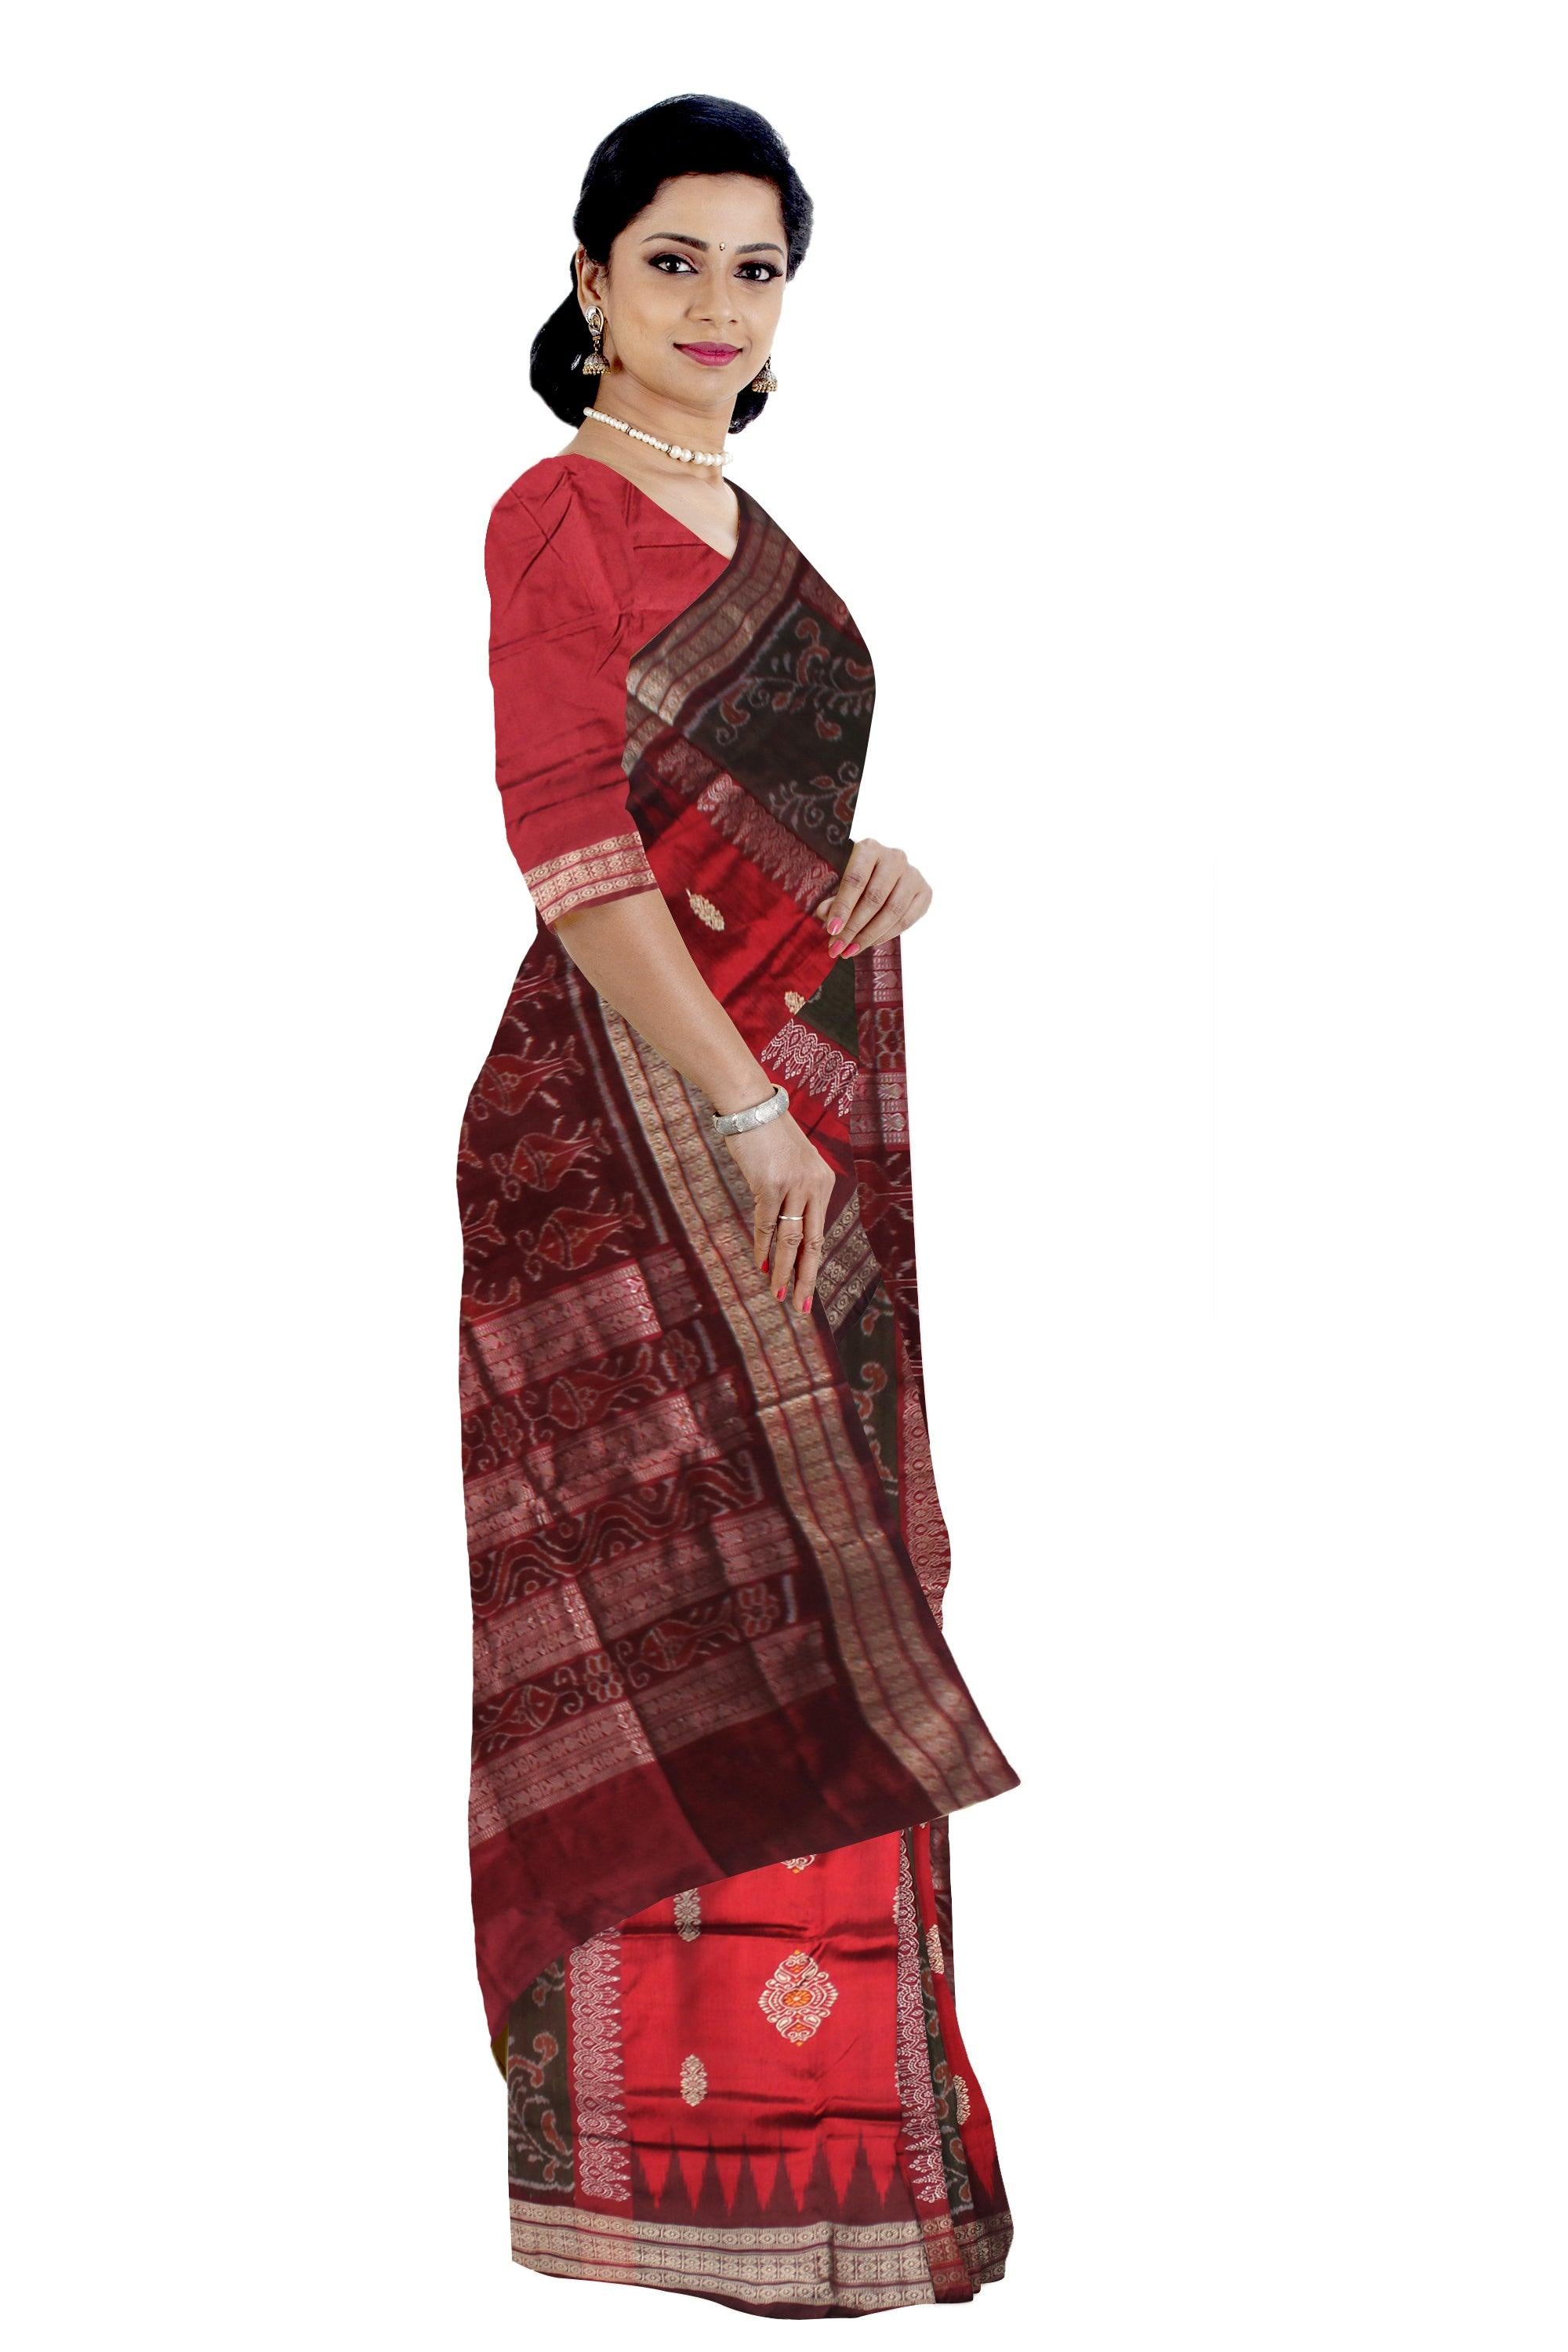 YOUNG GENERATION  WEAR RED AND MAROON COLOR BOMKEI PATA SAREE , ATTACHED WITH BLOUSE PIECE. - Koshali Arts & Crafts Enterprise